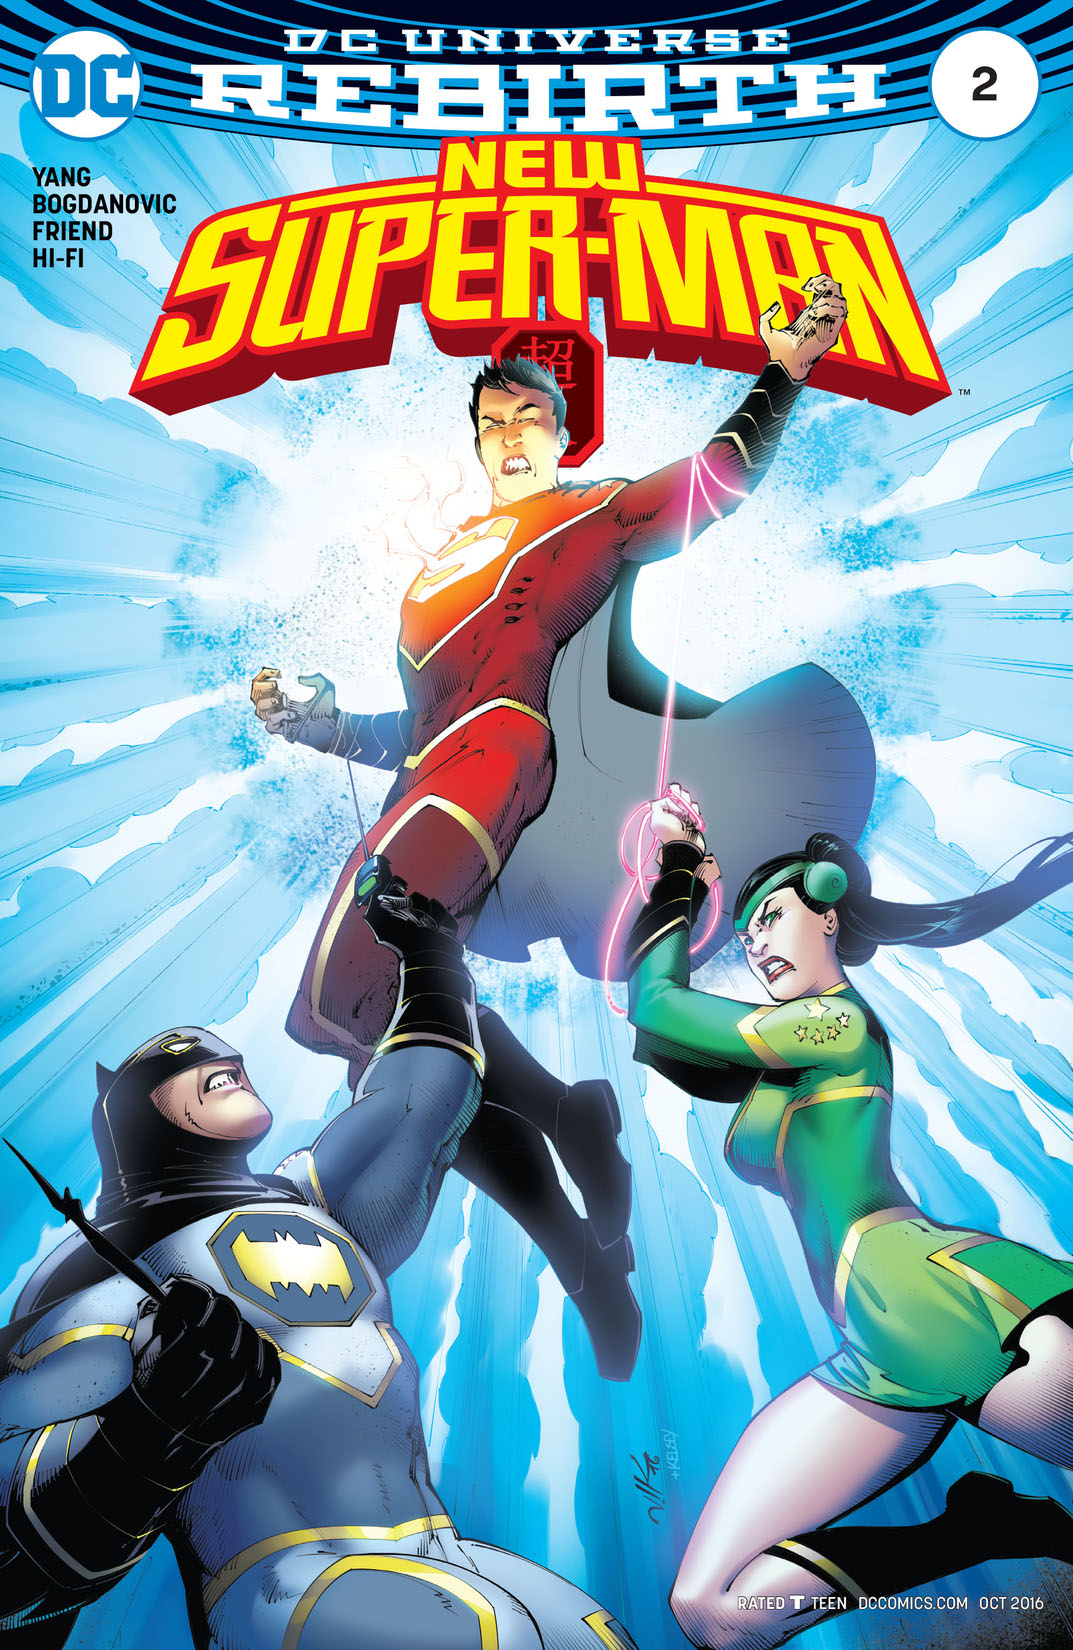 New Super-Man #2 preview images